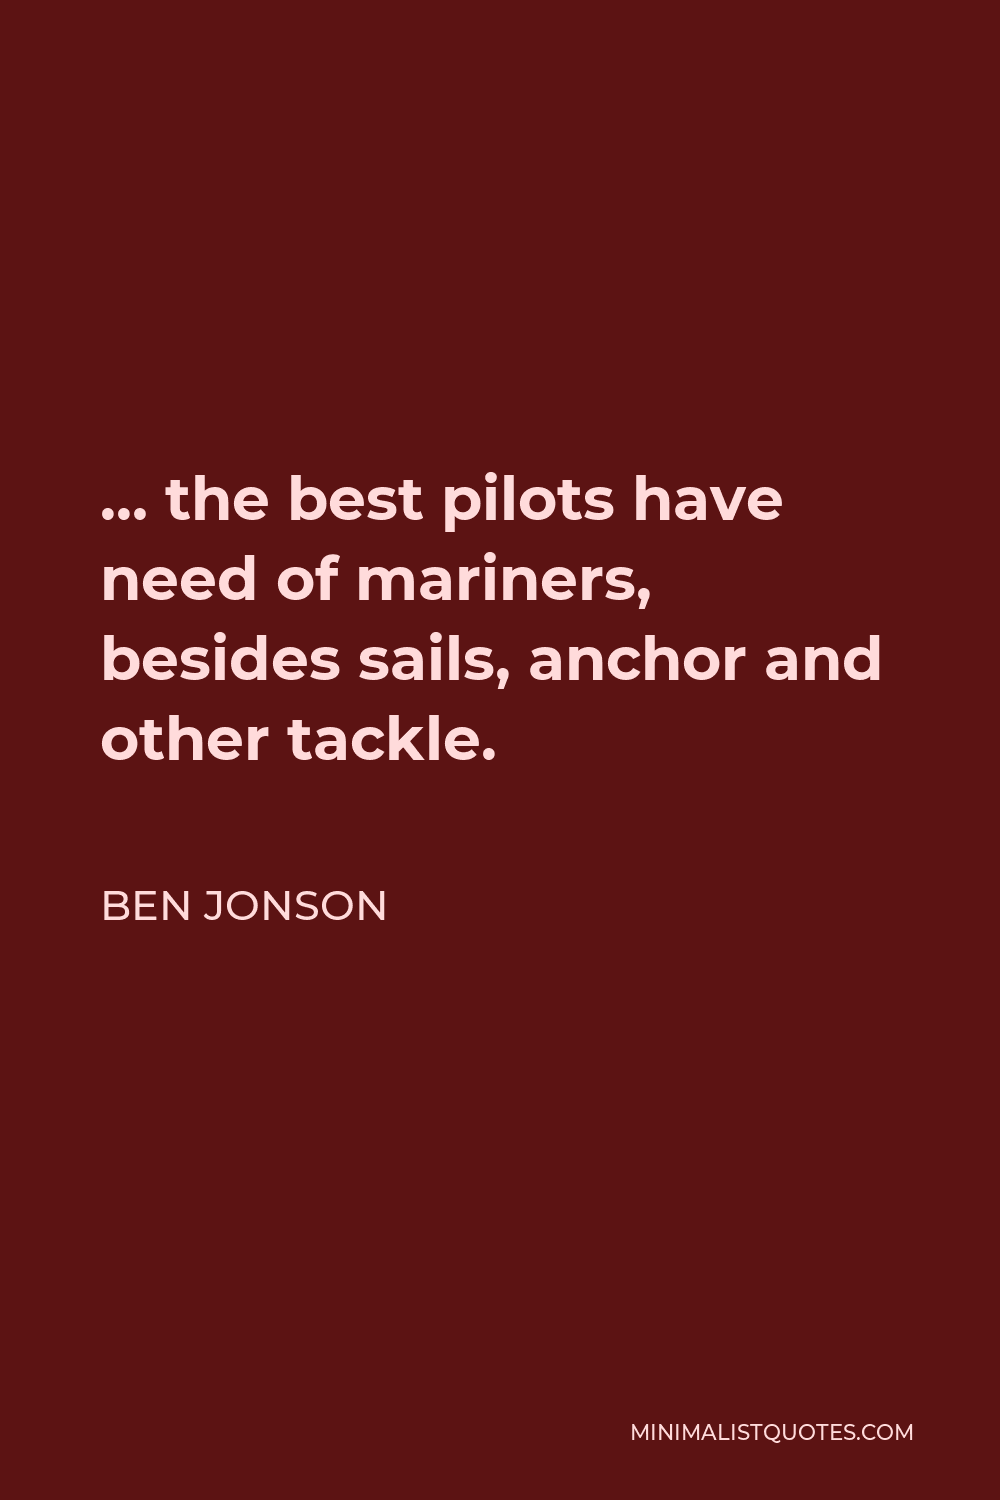 Ben Jonson Quote - … the best pilots have need of mariners, besides sails, anchor and other tackle.